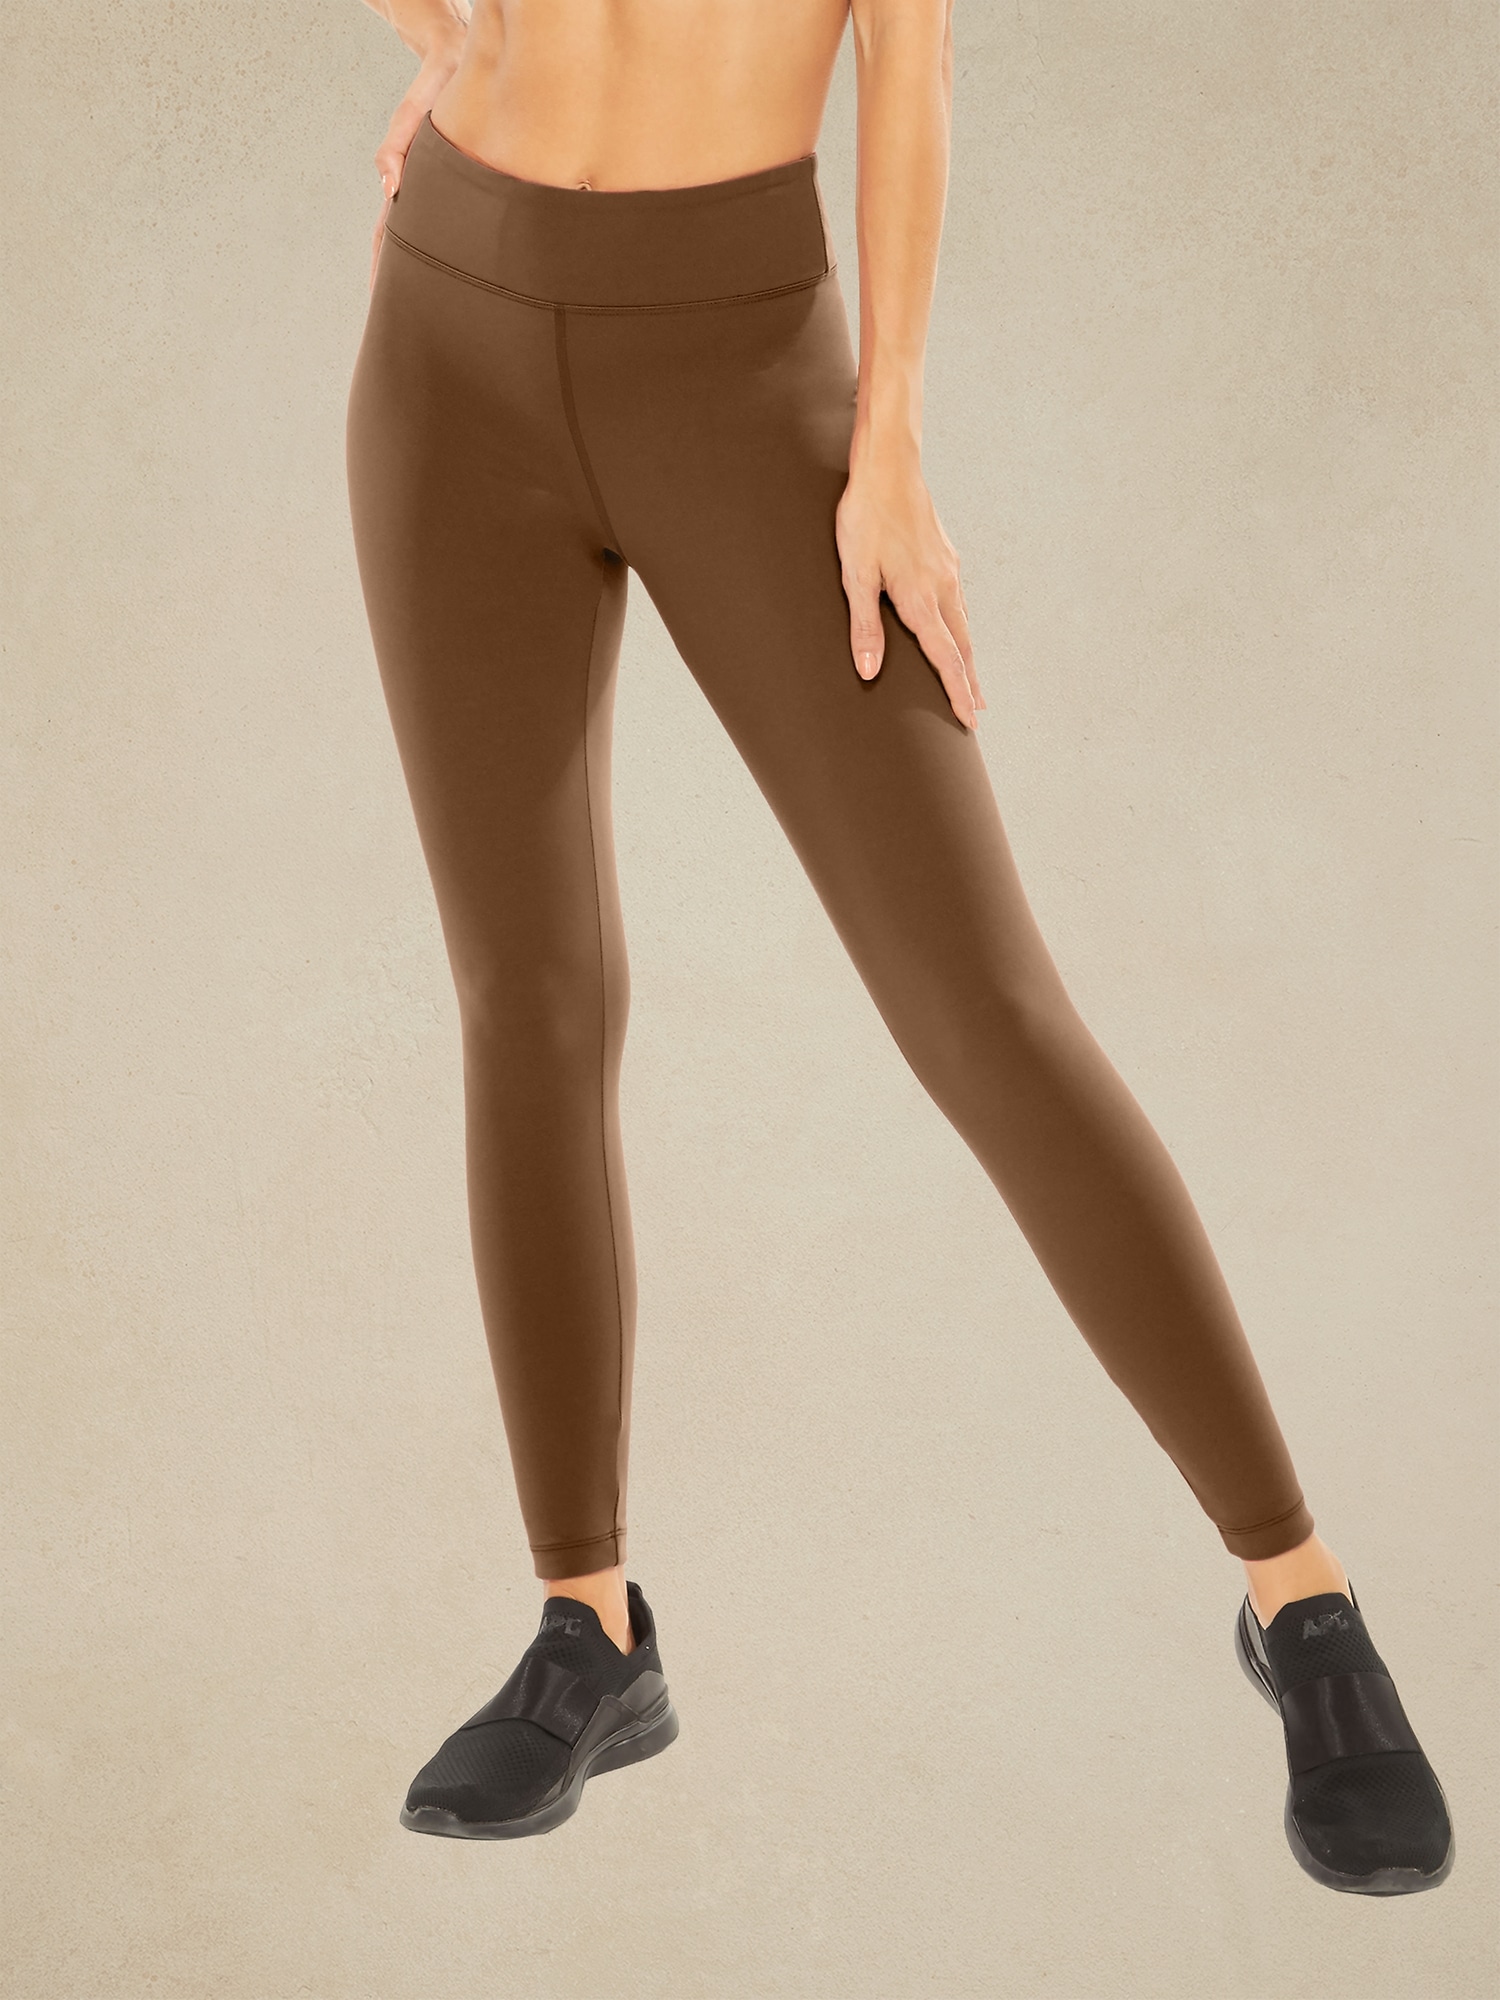 Koral, Lustrous High-Rise Legging, 15 Workout Pieces You Can Score at Banana  Republic, Because They Have Some Very Good Stuff